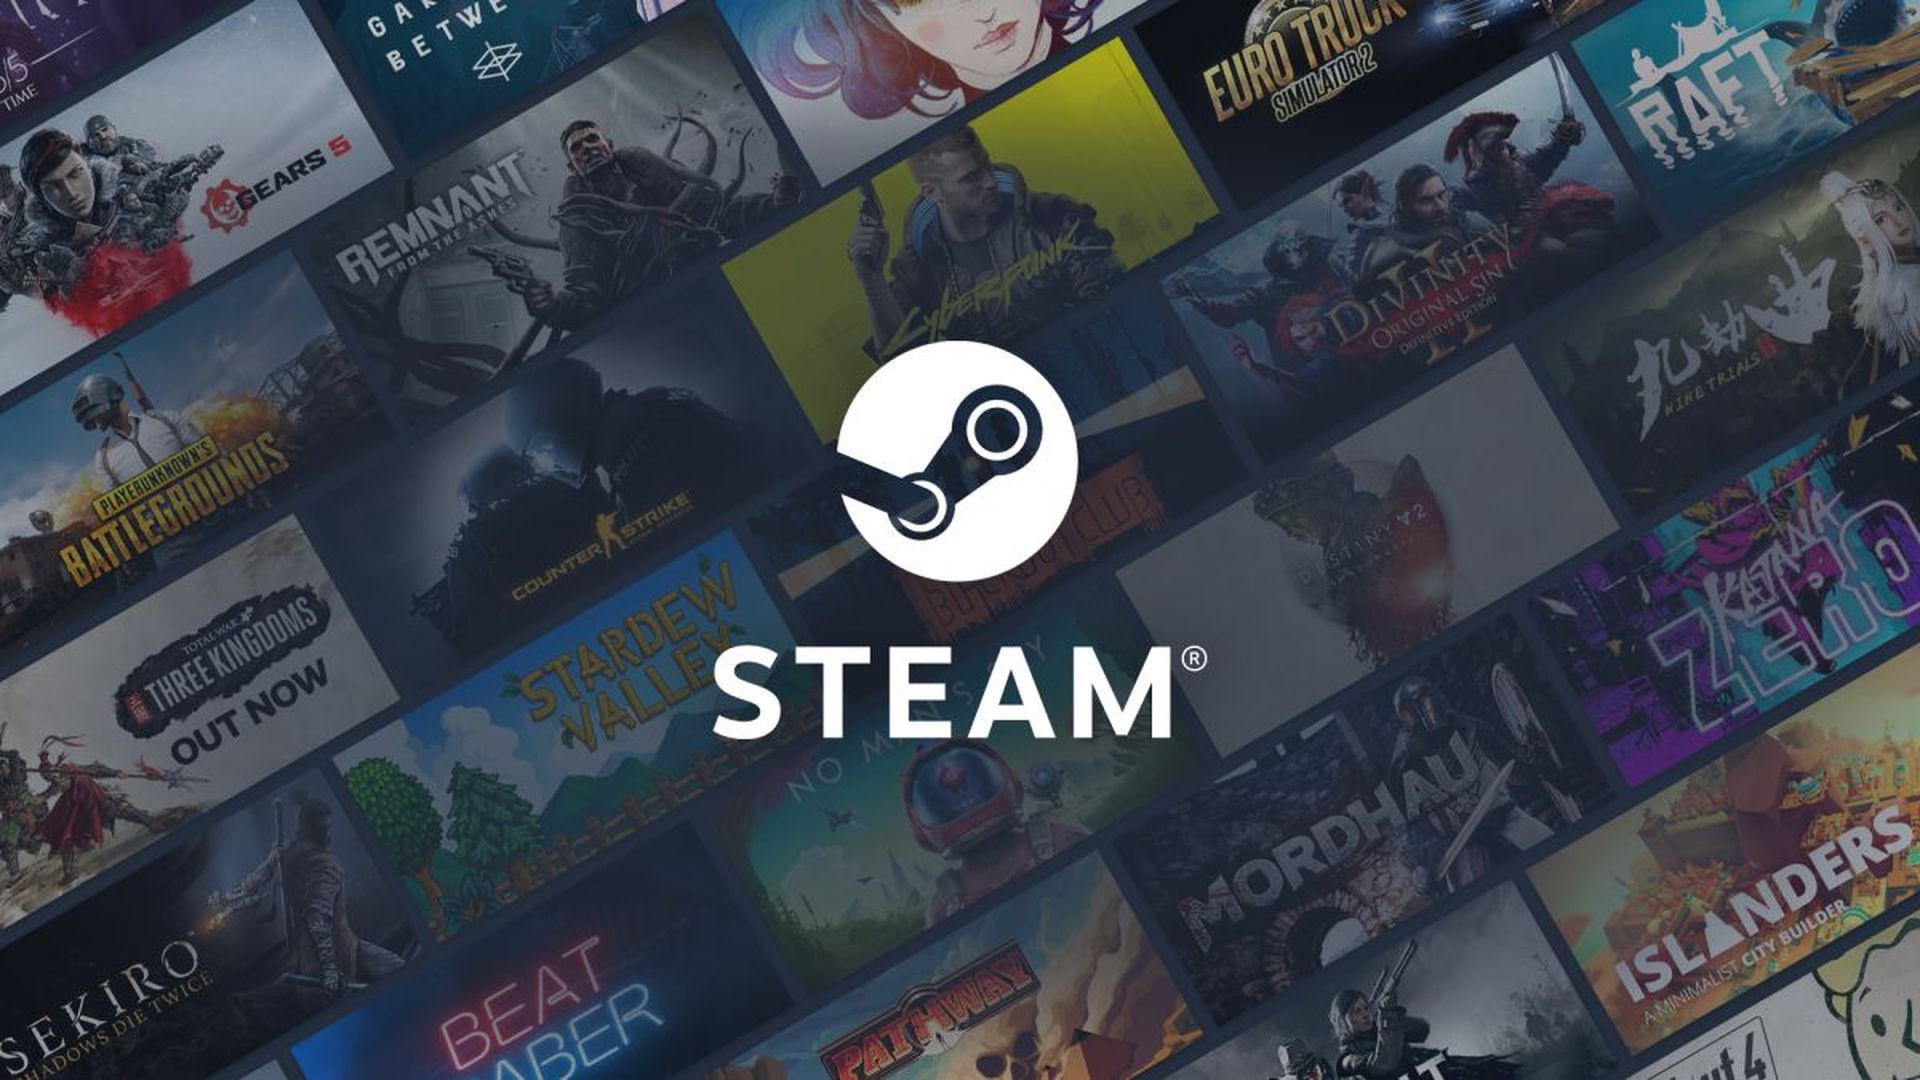 Today we prepared the best Steam Summer Sale 2022 deals you can find. Summer is coming so fill your library with great games without breaking your bank account!